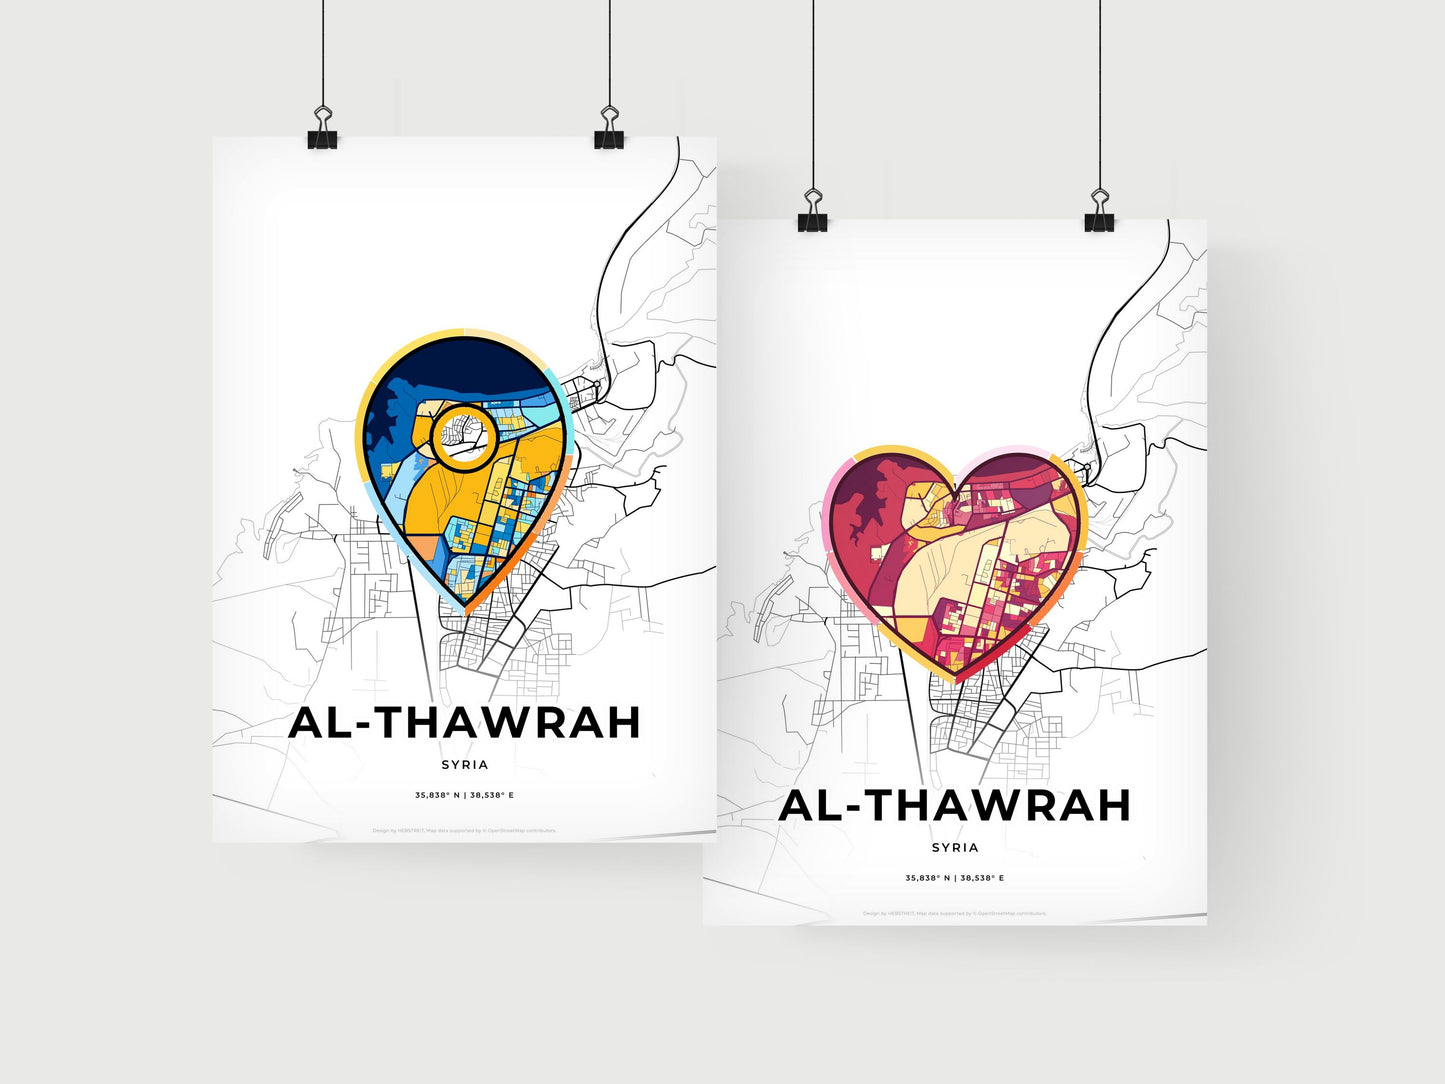 AL-THAWRAH SYRIA minimal art map with a colorful icon. Where it all began, Couple map gift.